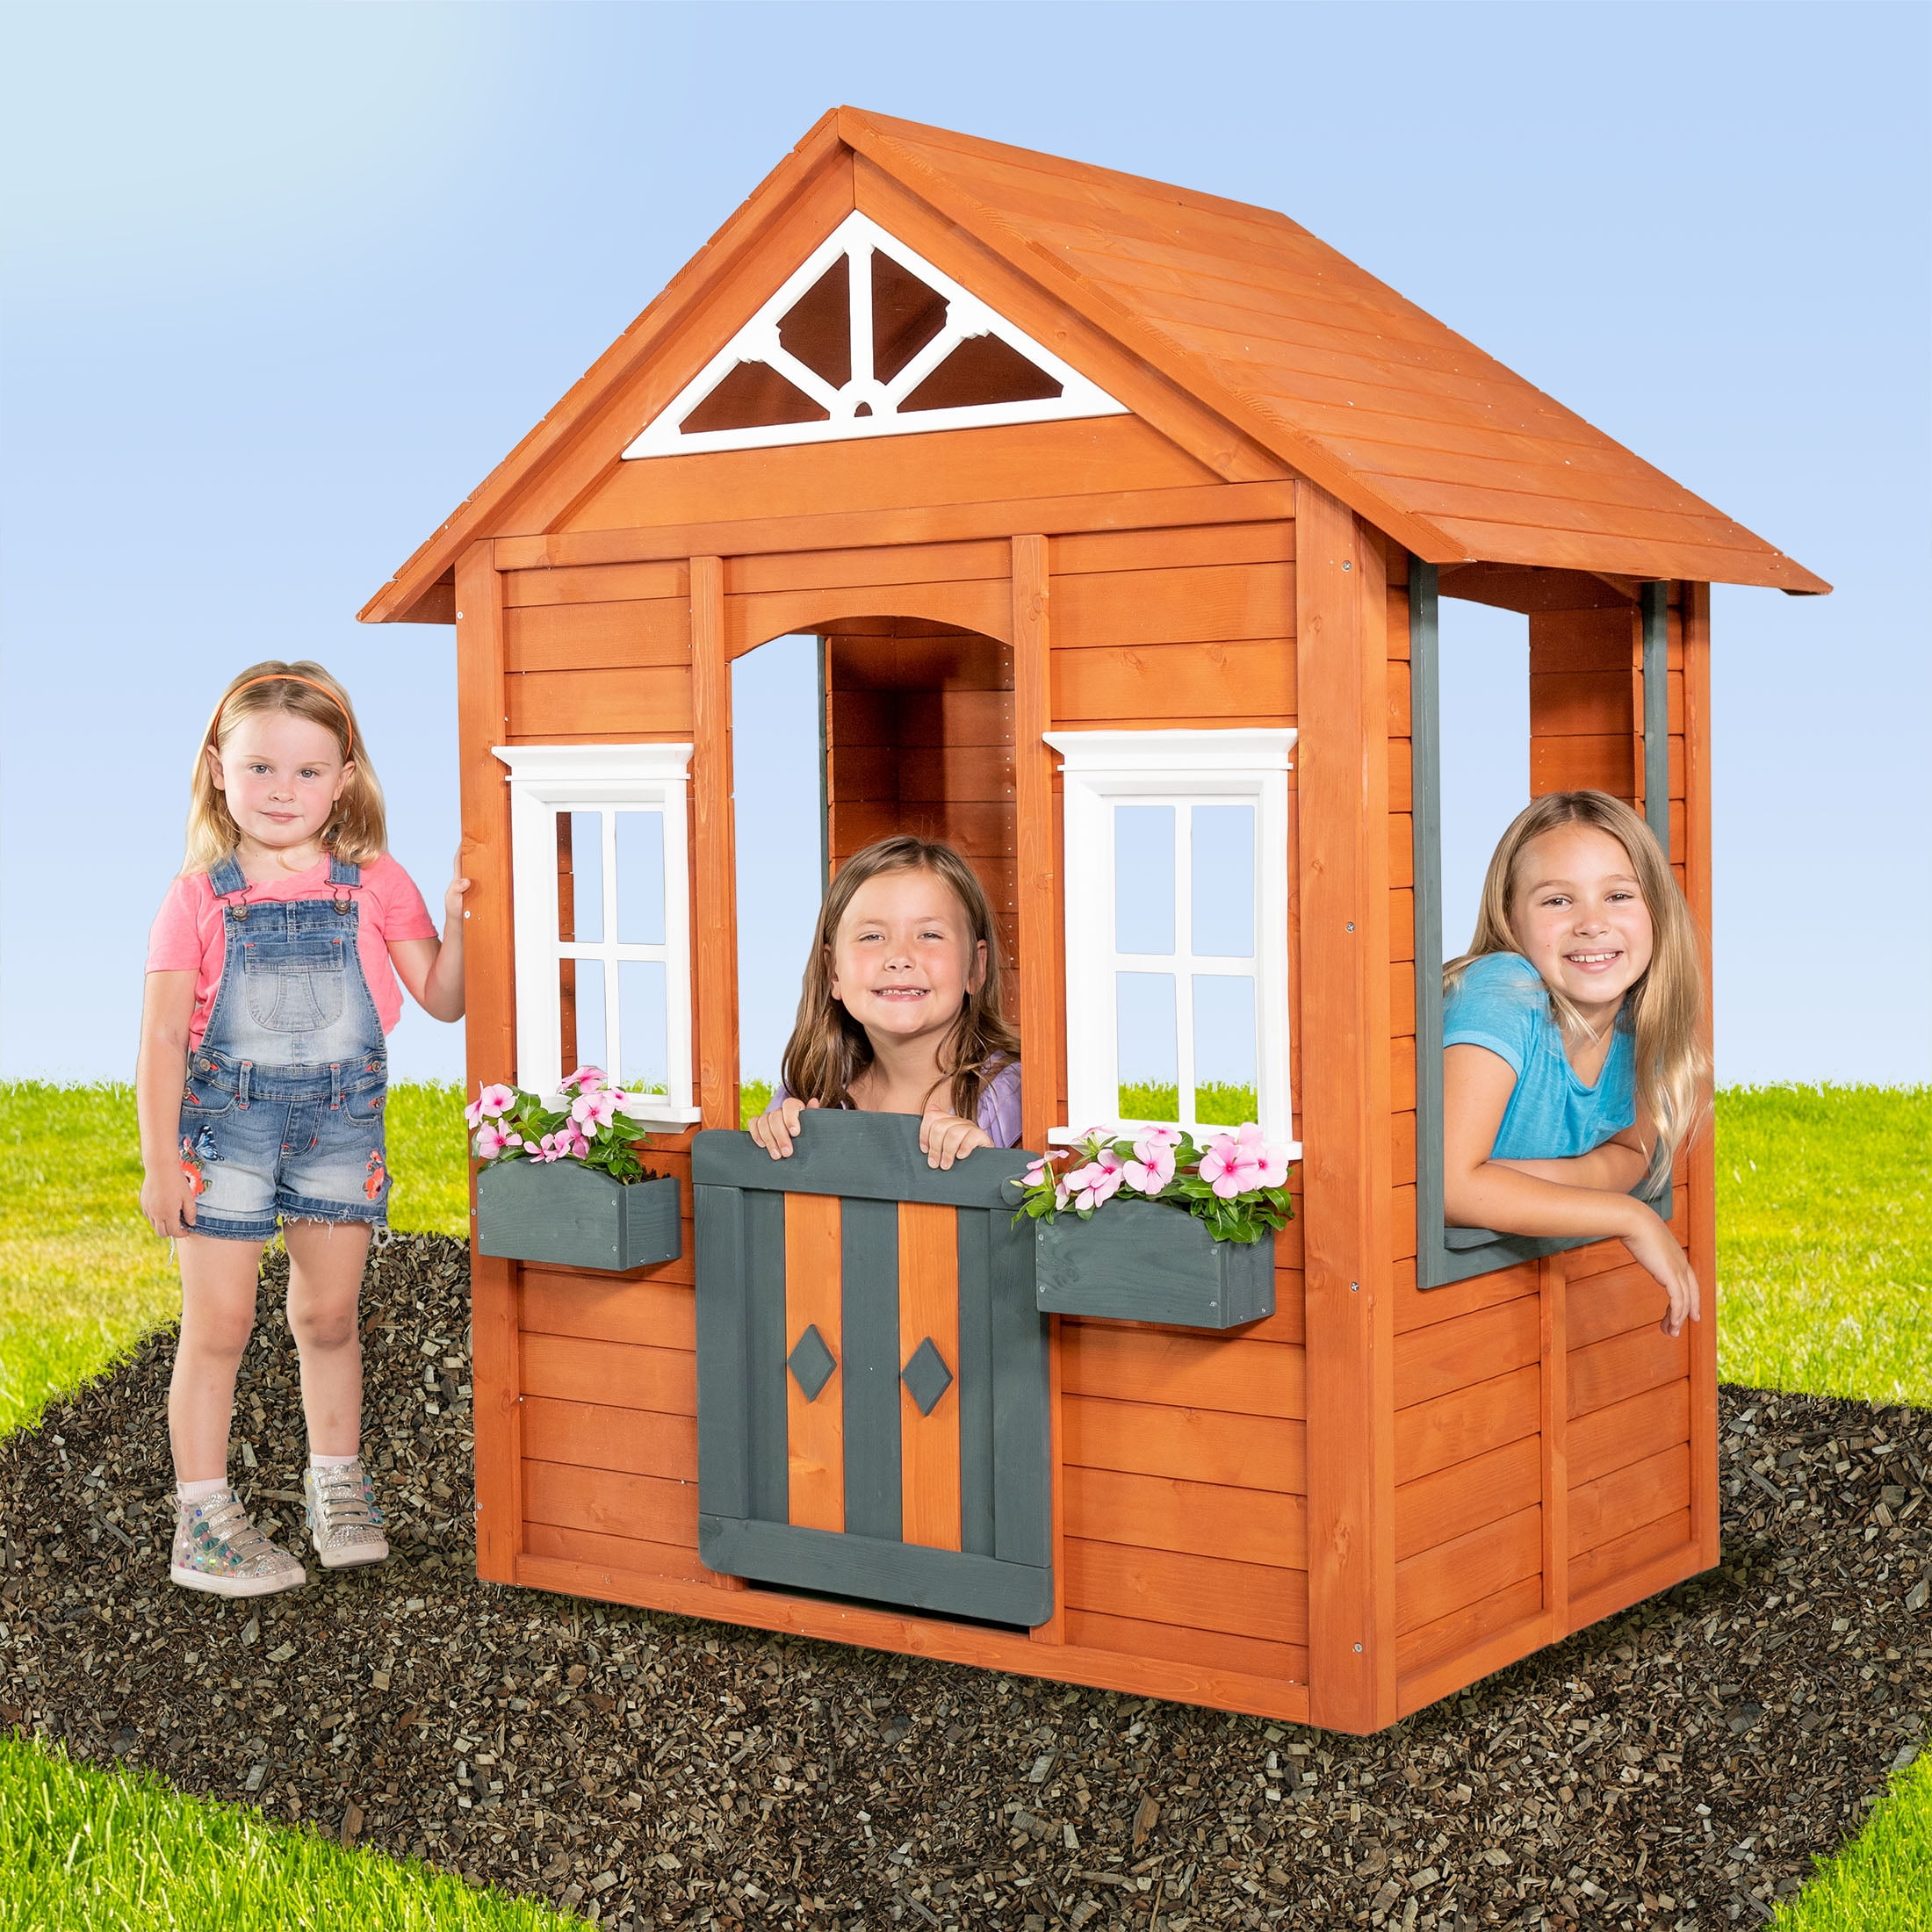 Sportspower Woodbridge Wooden Outdoor Backyard Playhouse with Flower Boxes Red 